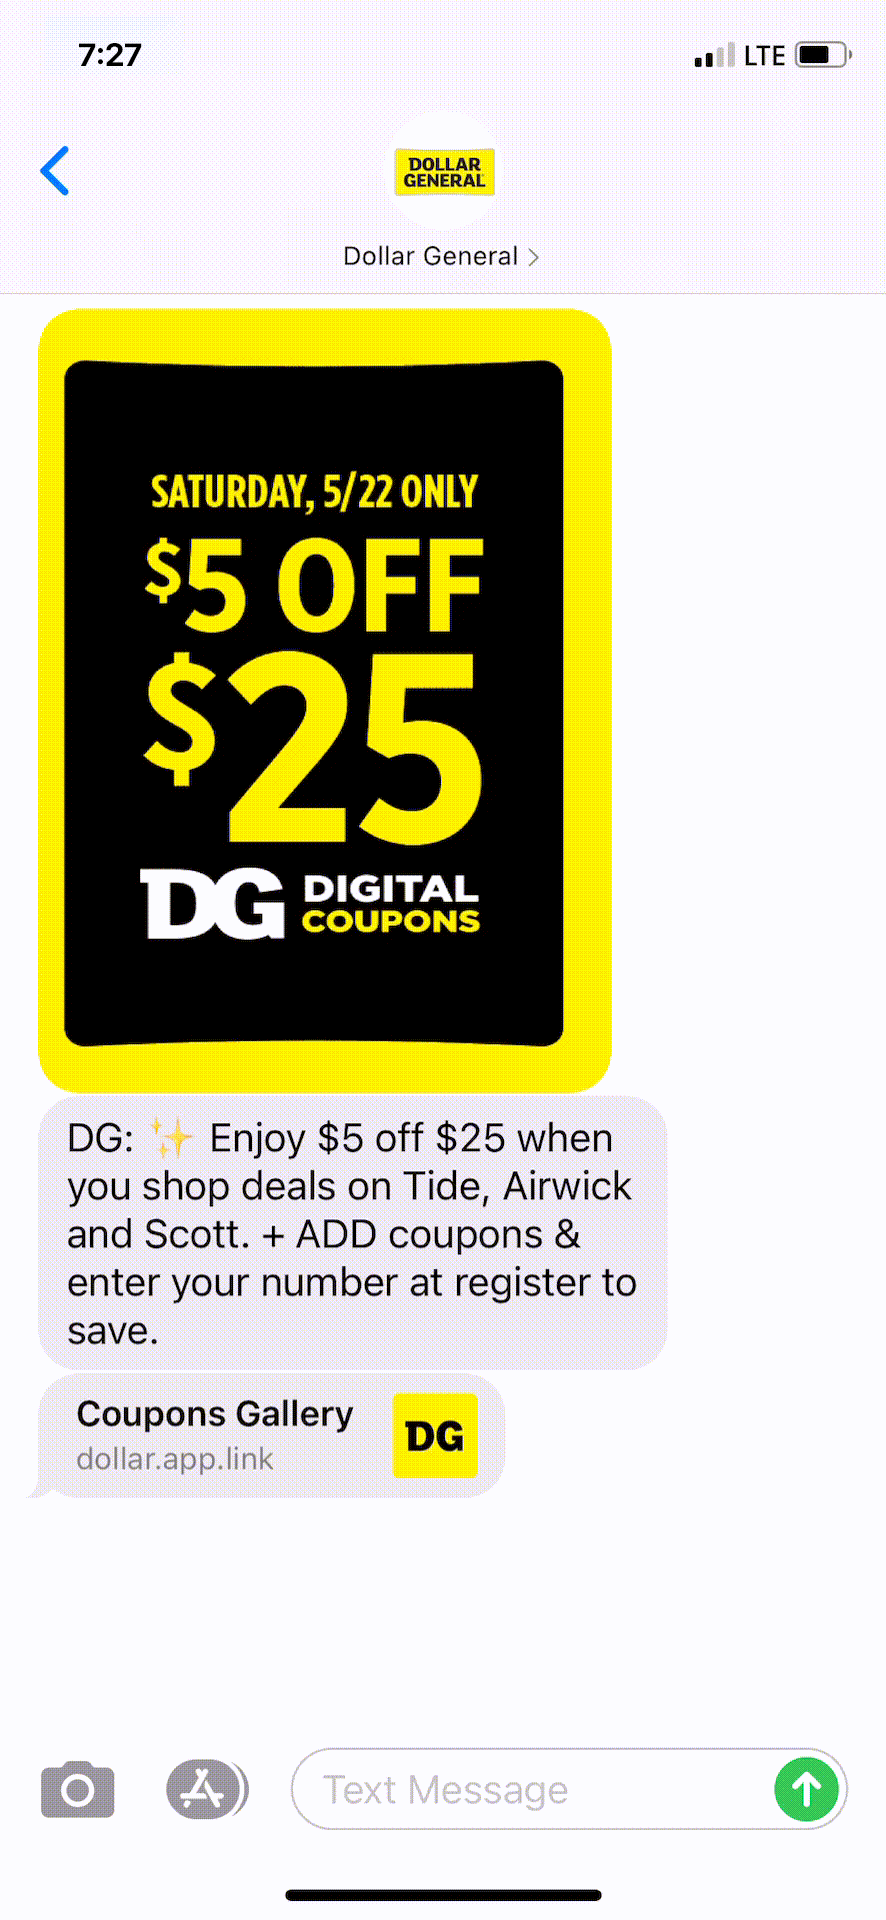 Dollar-General-Text-Message-Marketing-Example-05.20.2021